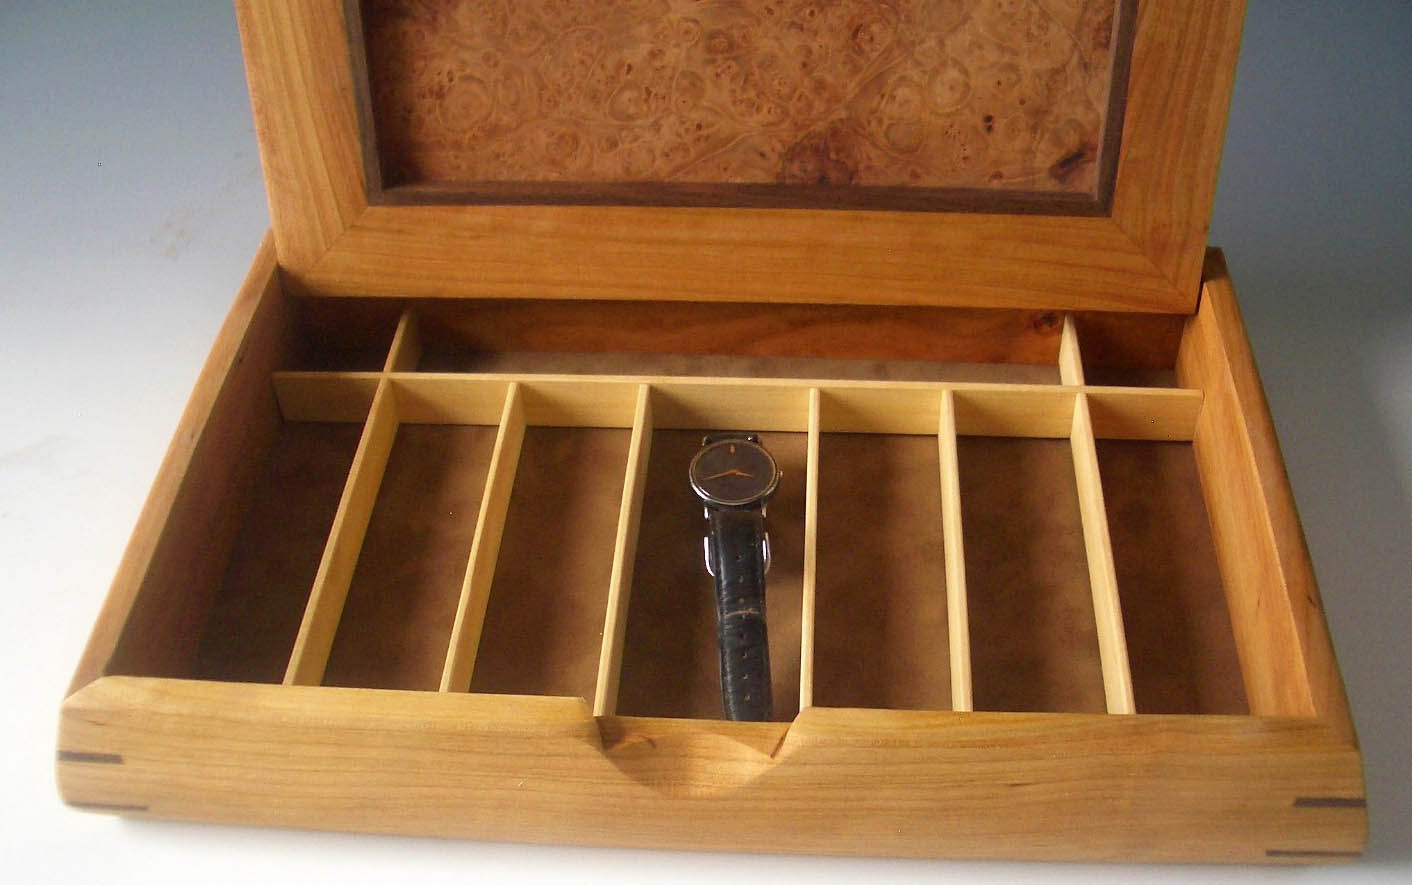 Man jewelry watch box handmade of beautiful woods; photo shows box open with long compartments to hold watches